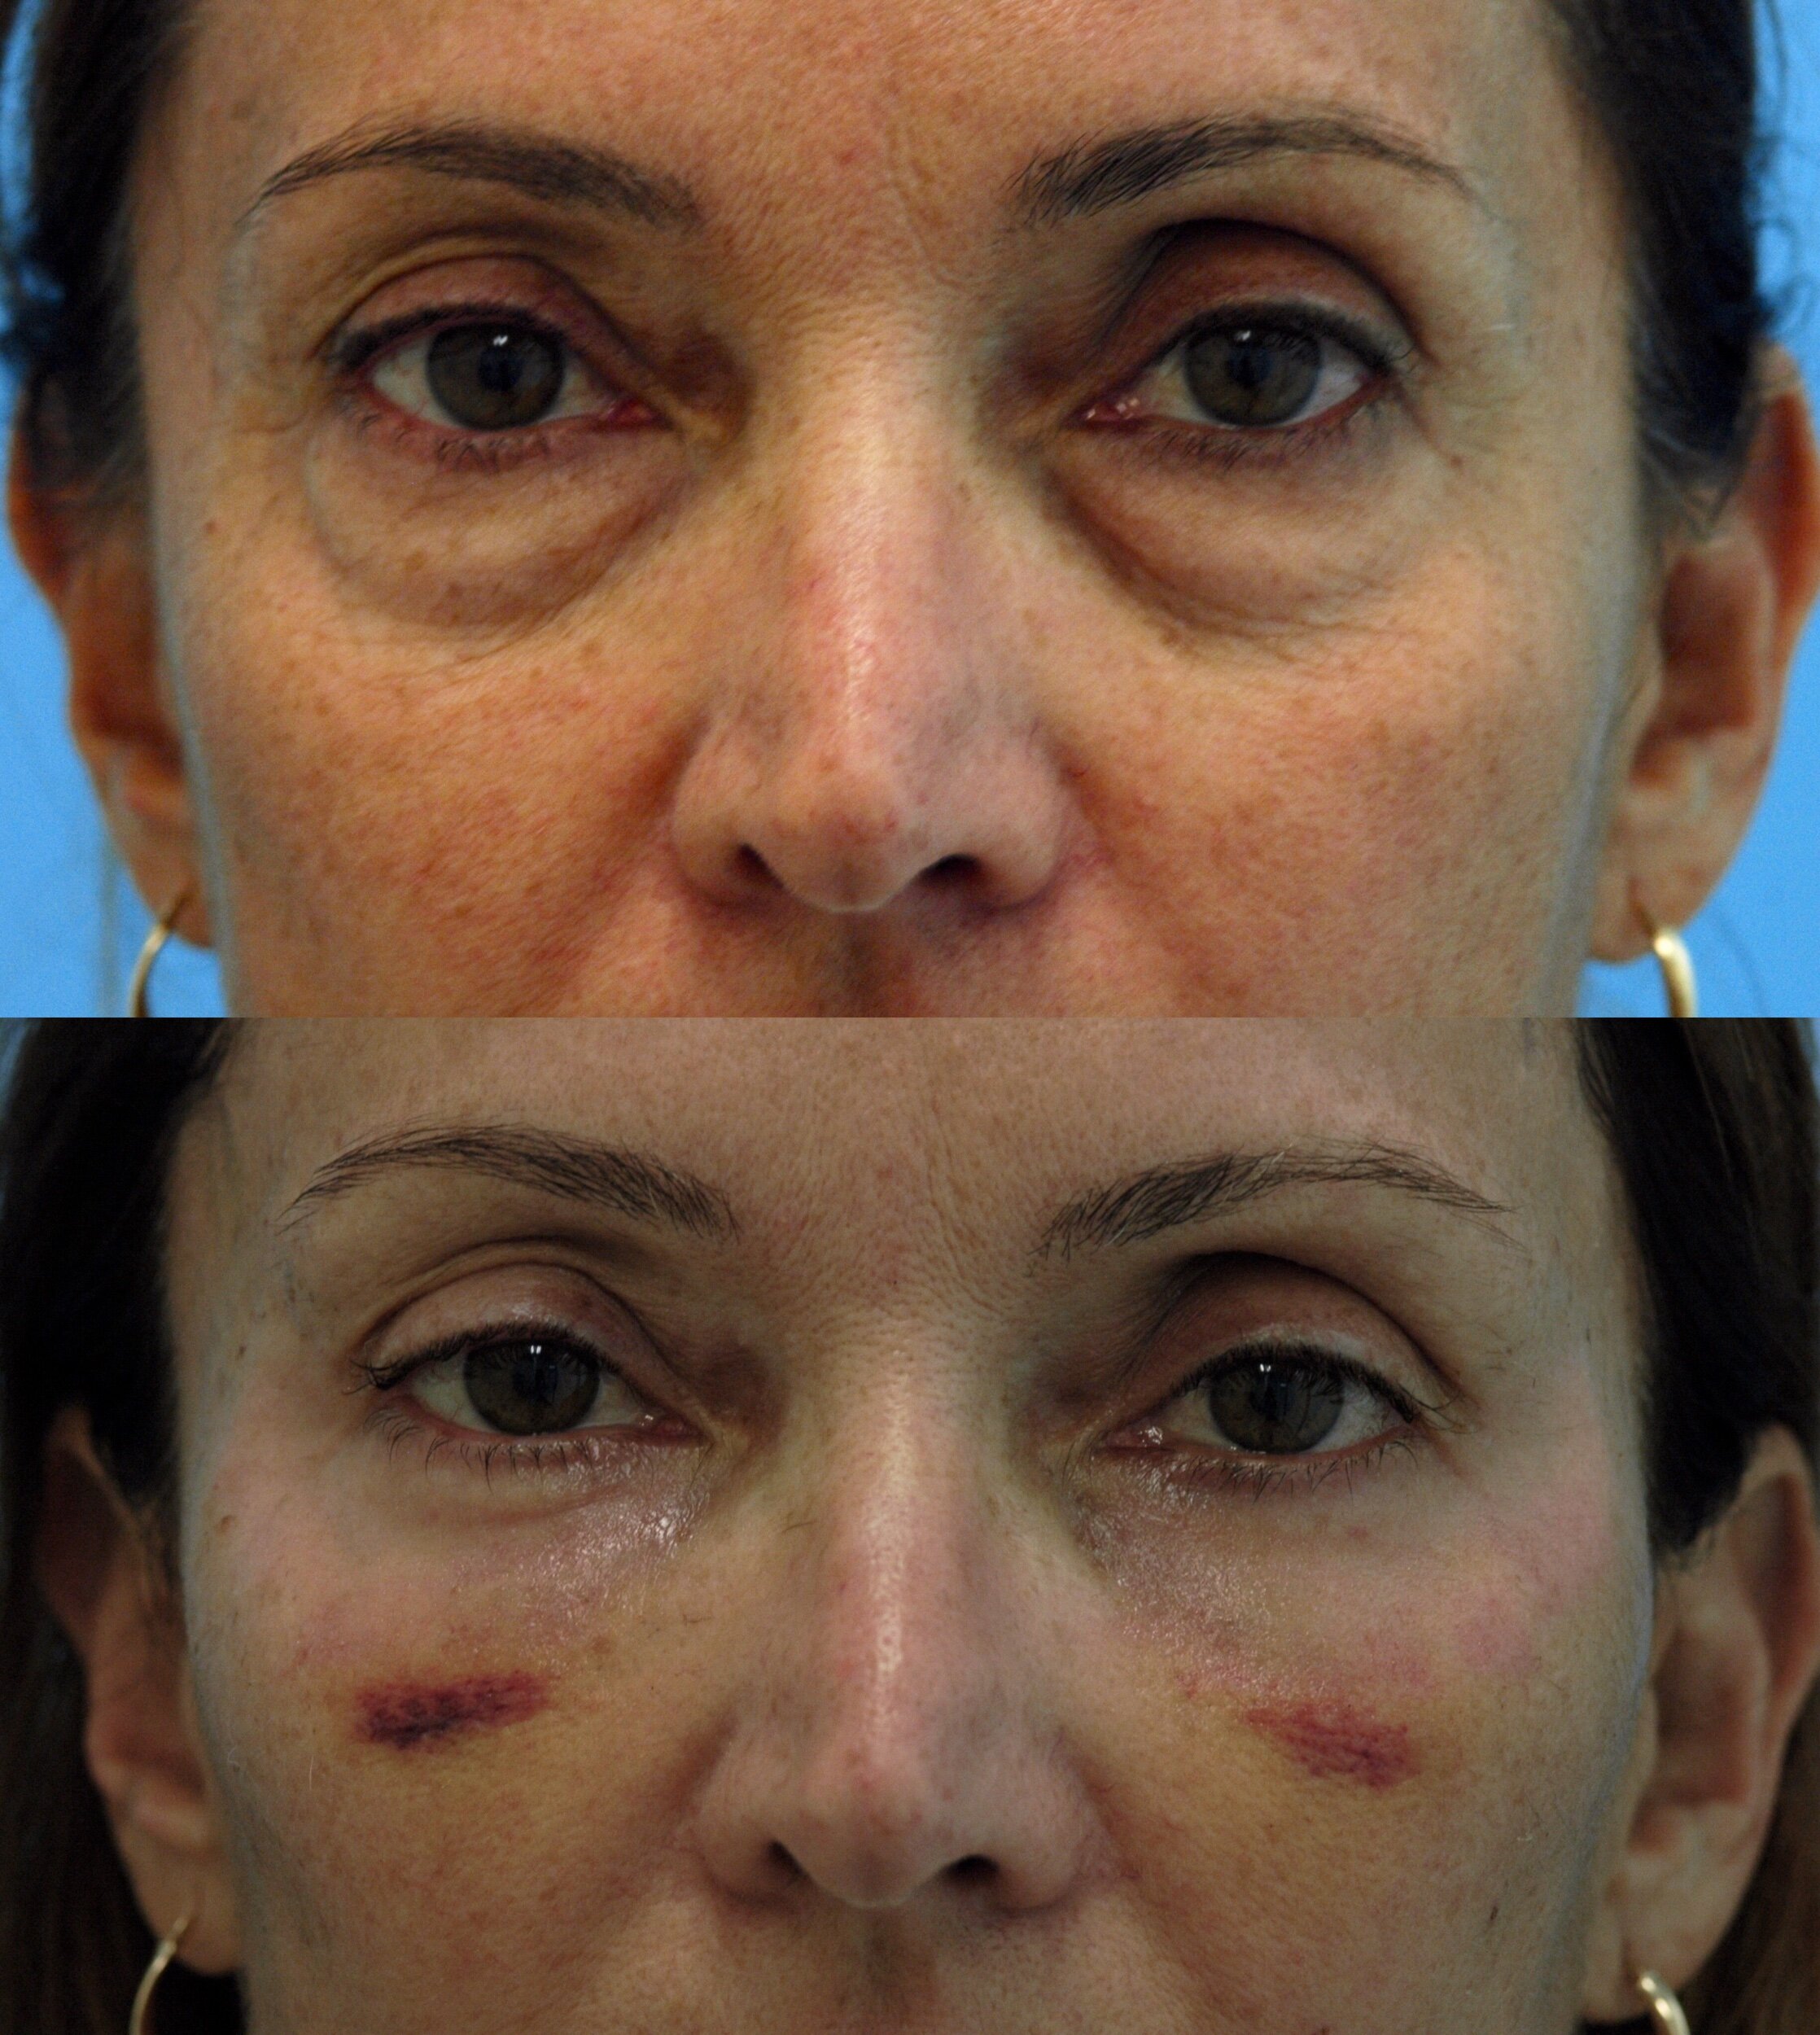  Lower blepharoplasty with fat transfer - 1 week out    